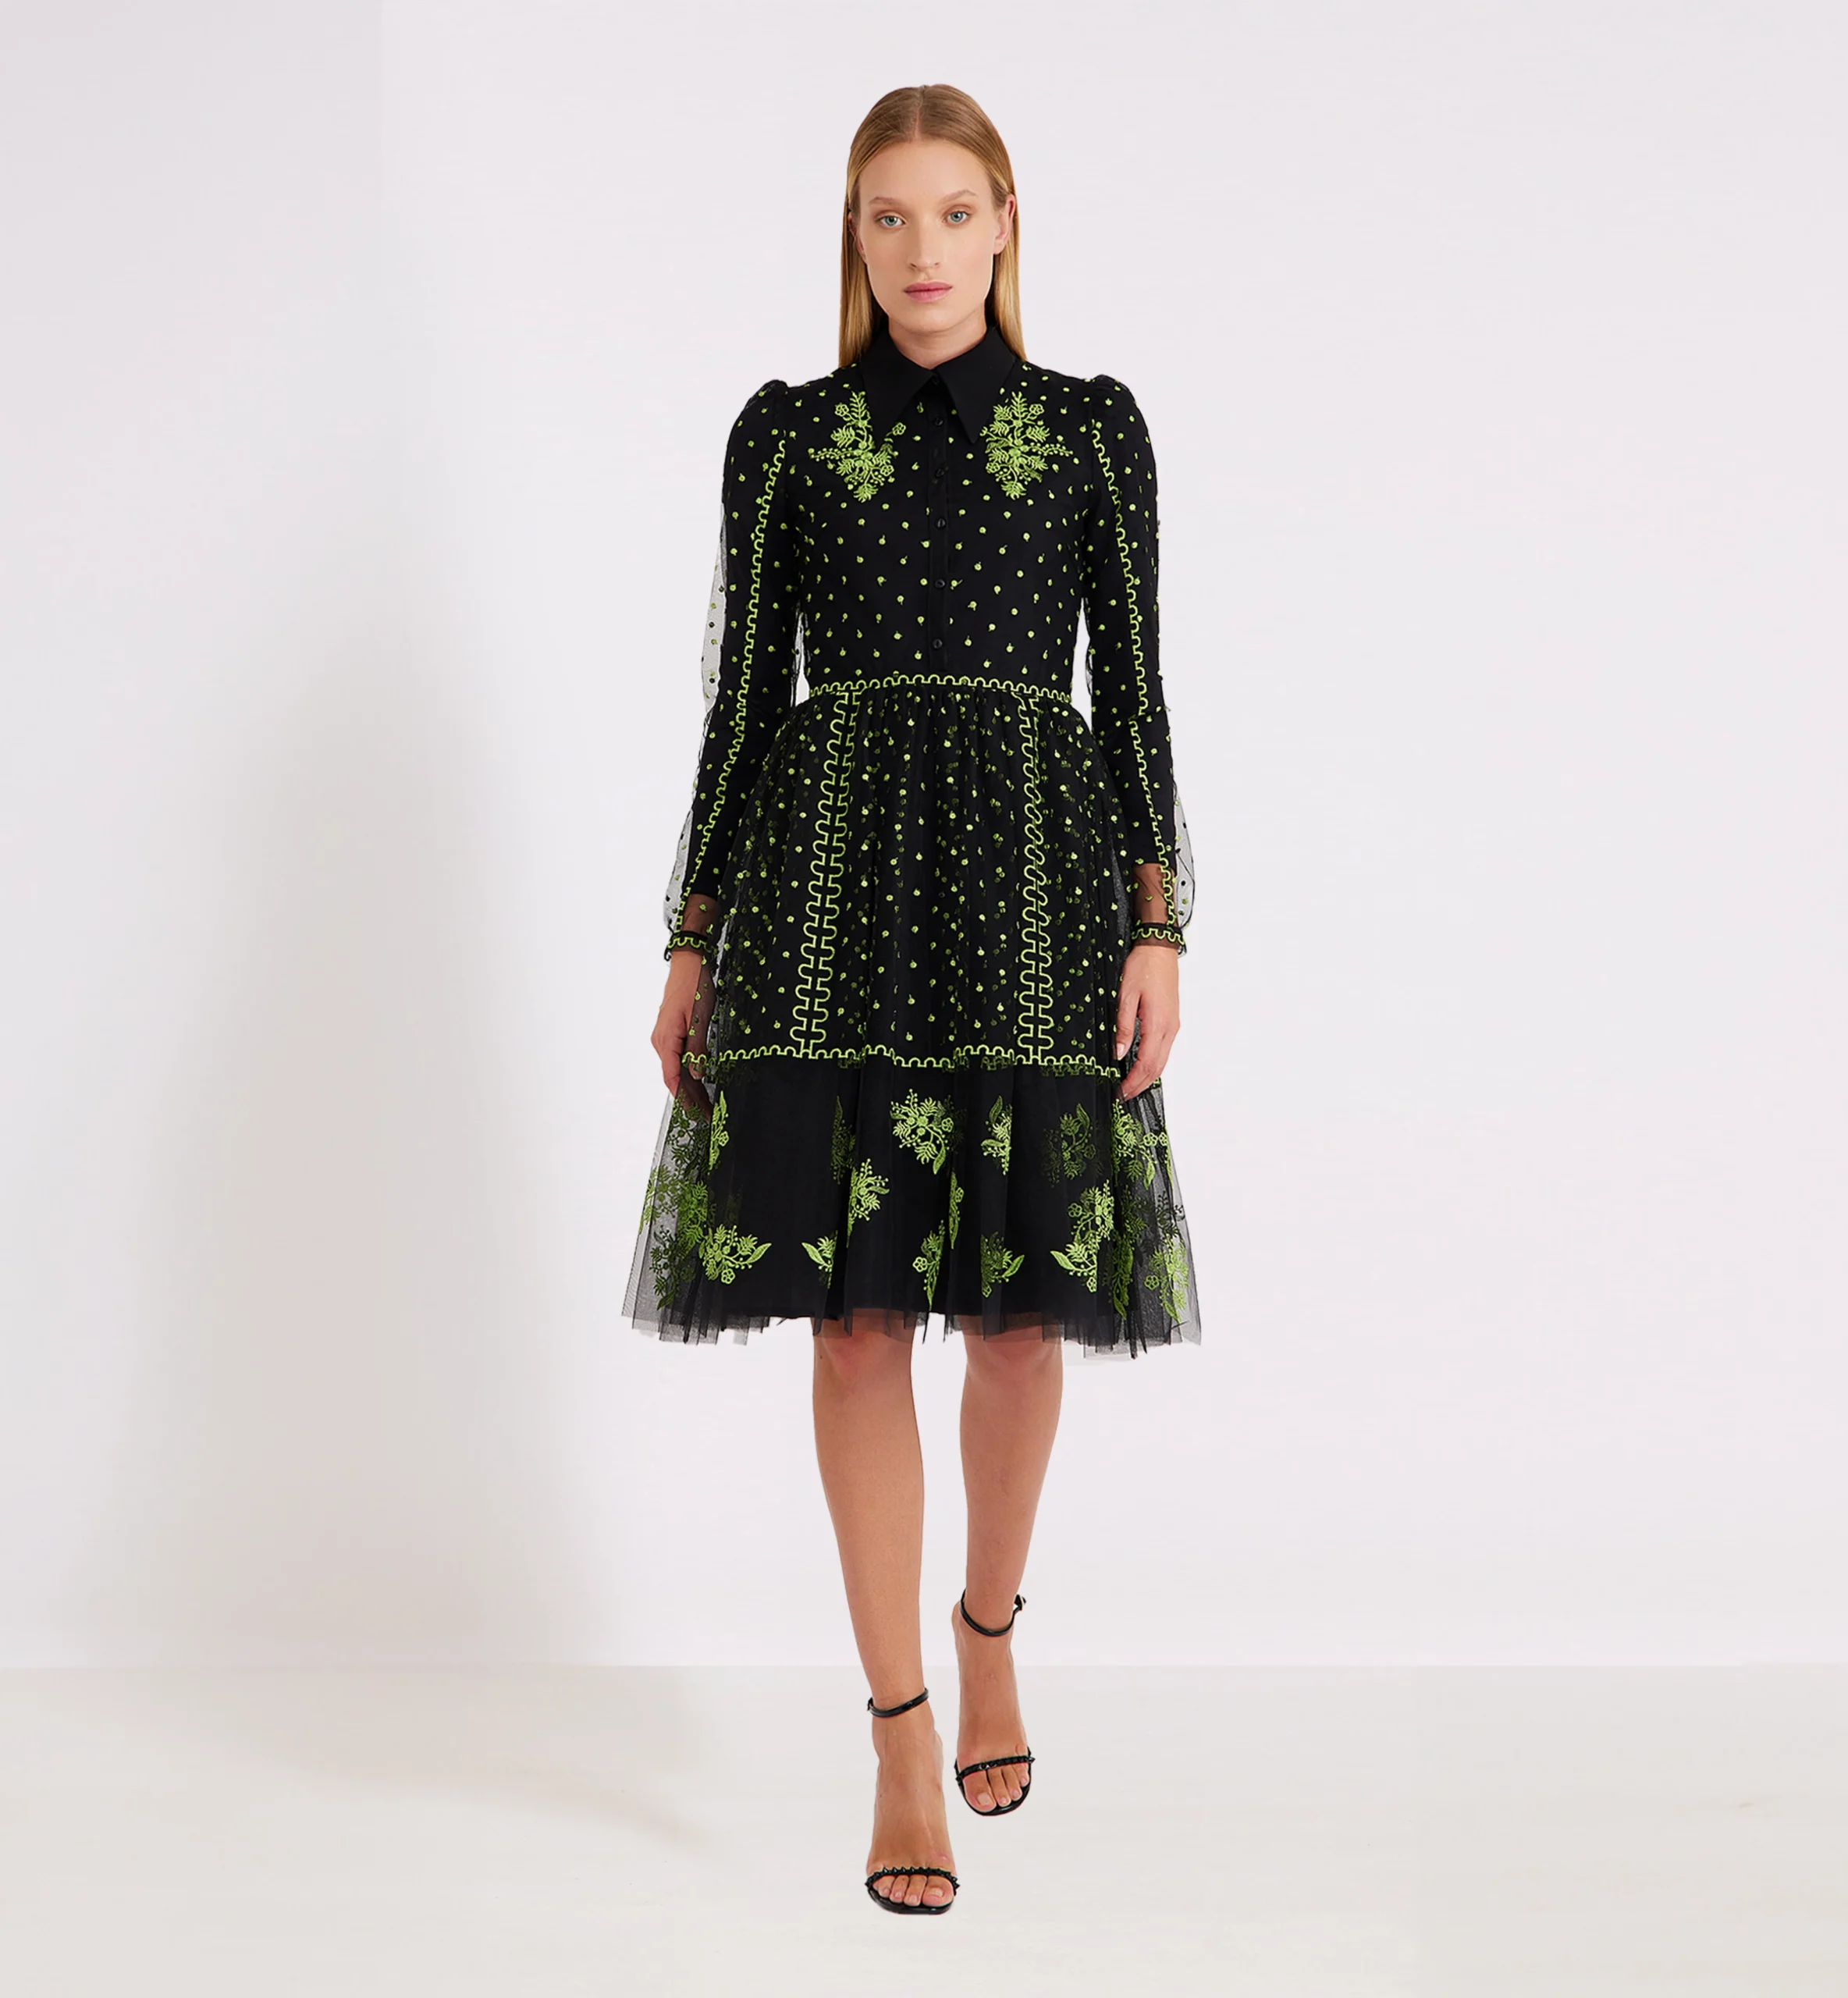 Embroidered dots, flowers and lines on mesh collared dress, green